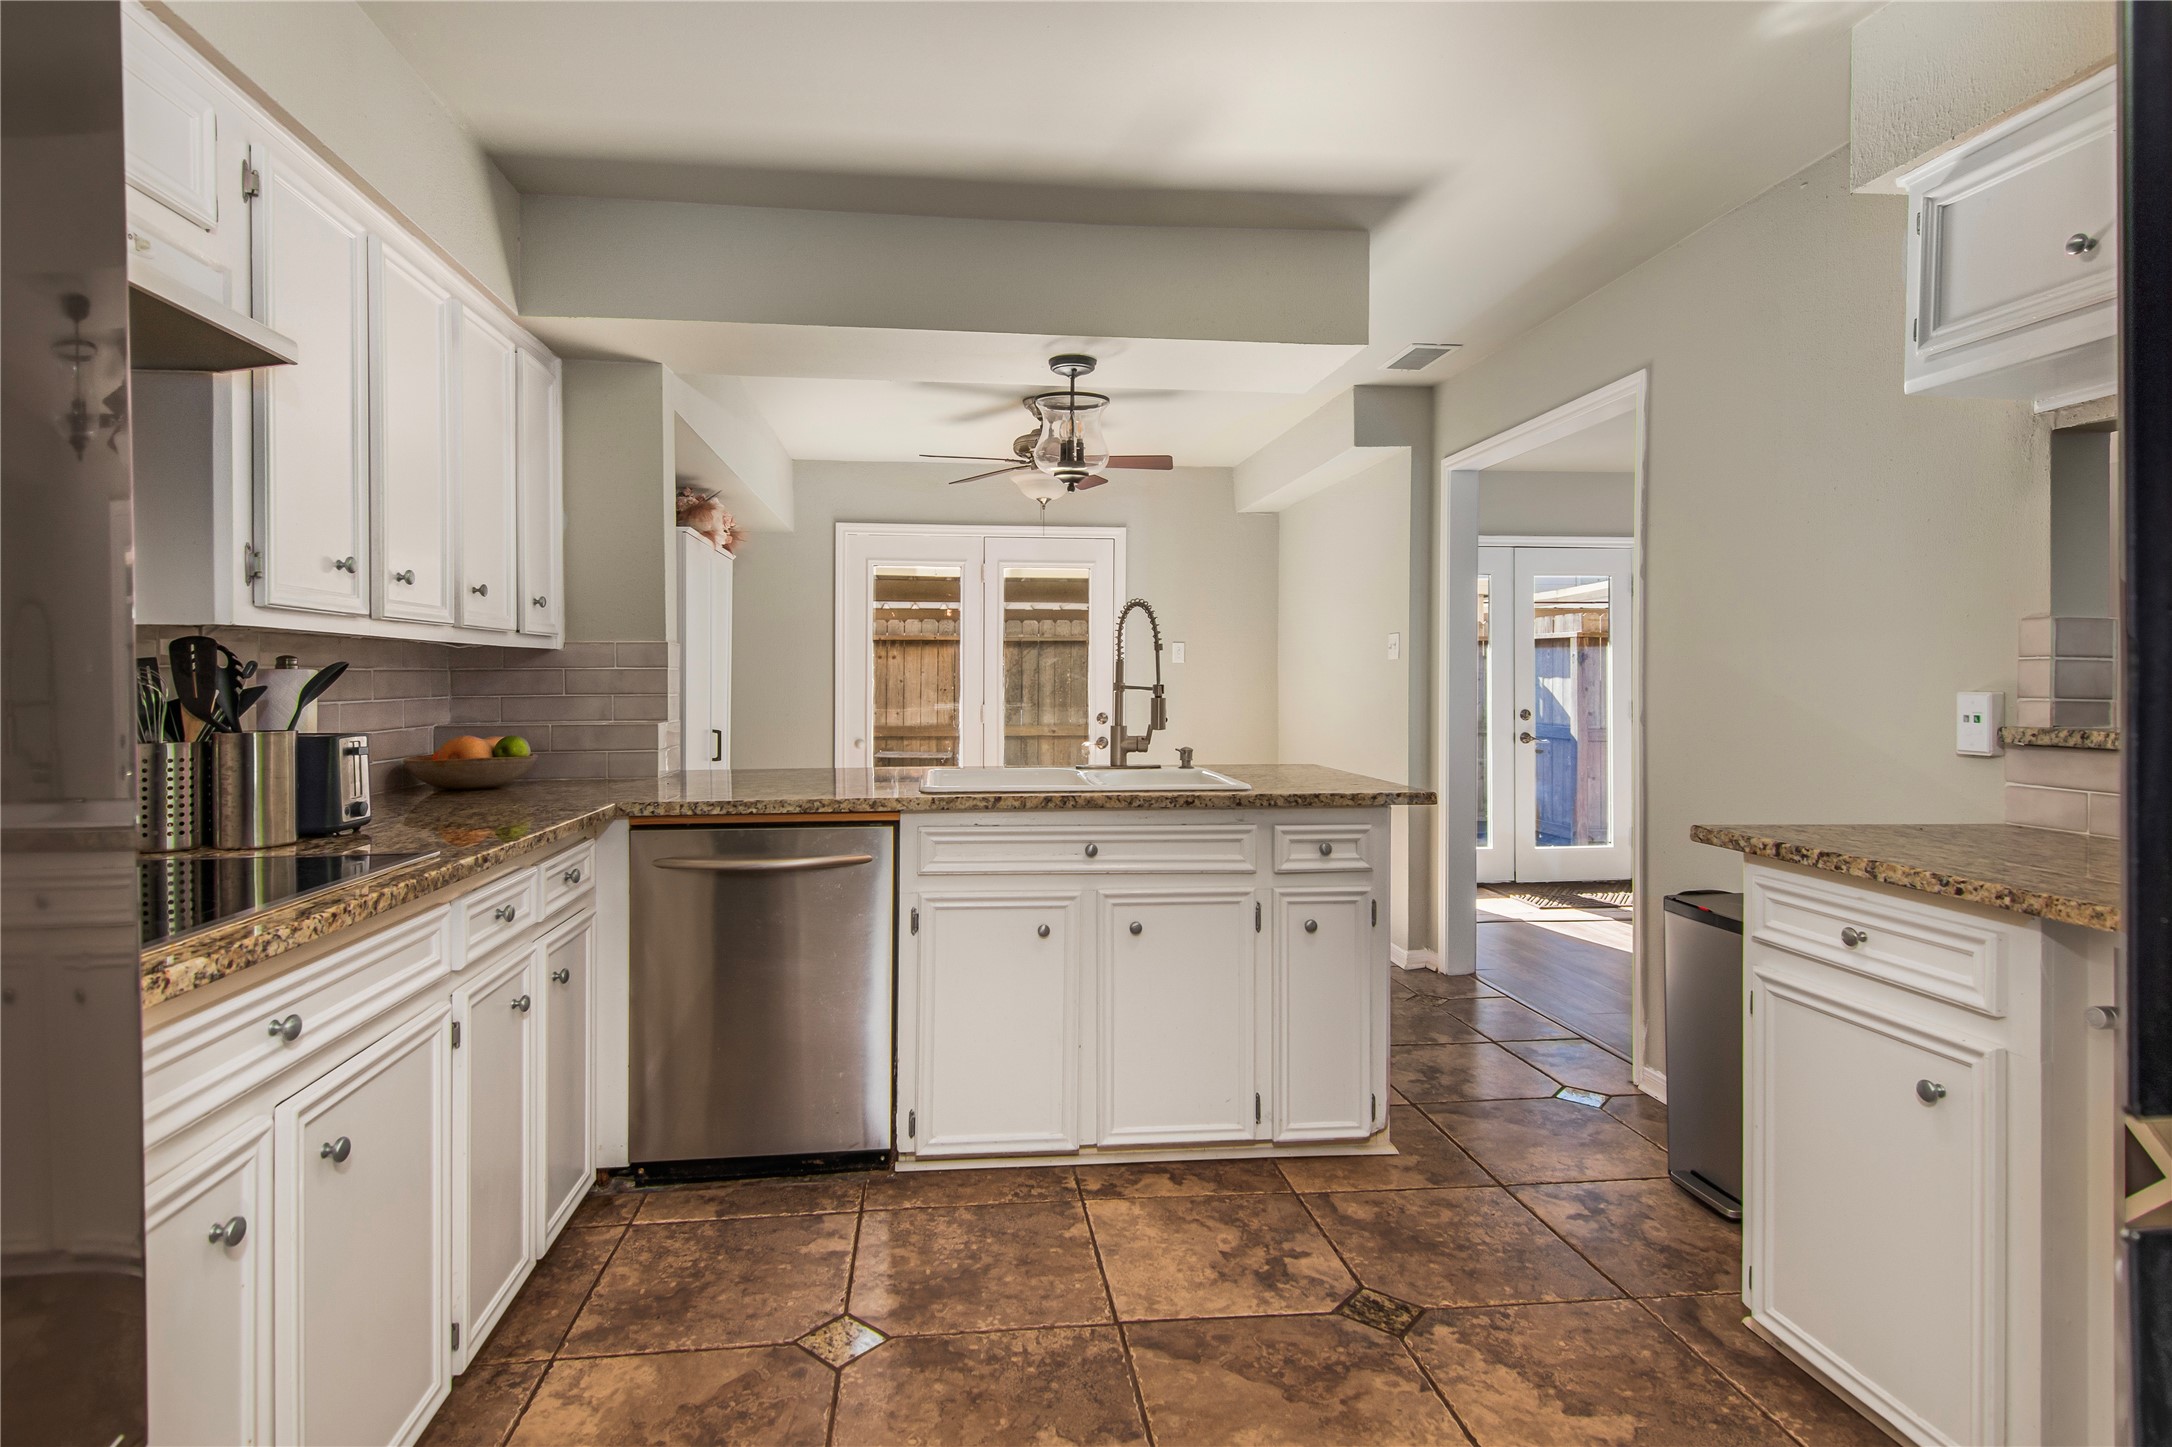 Kitchen with granite countertops and tiled floors